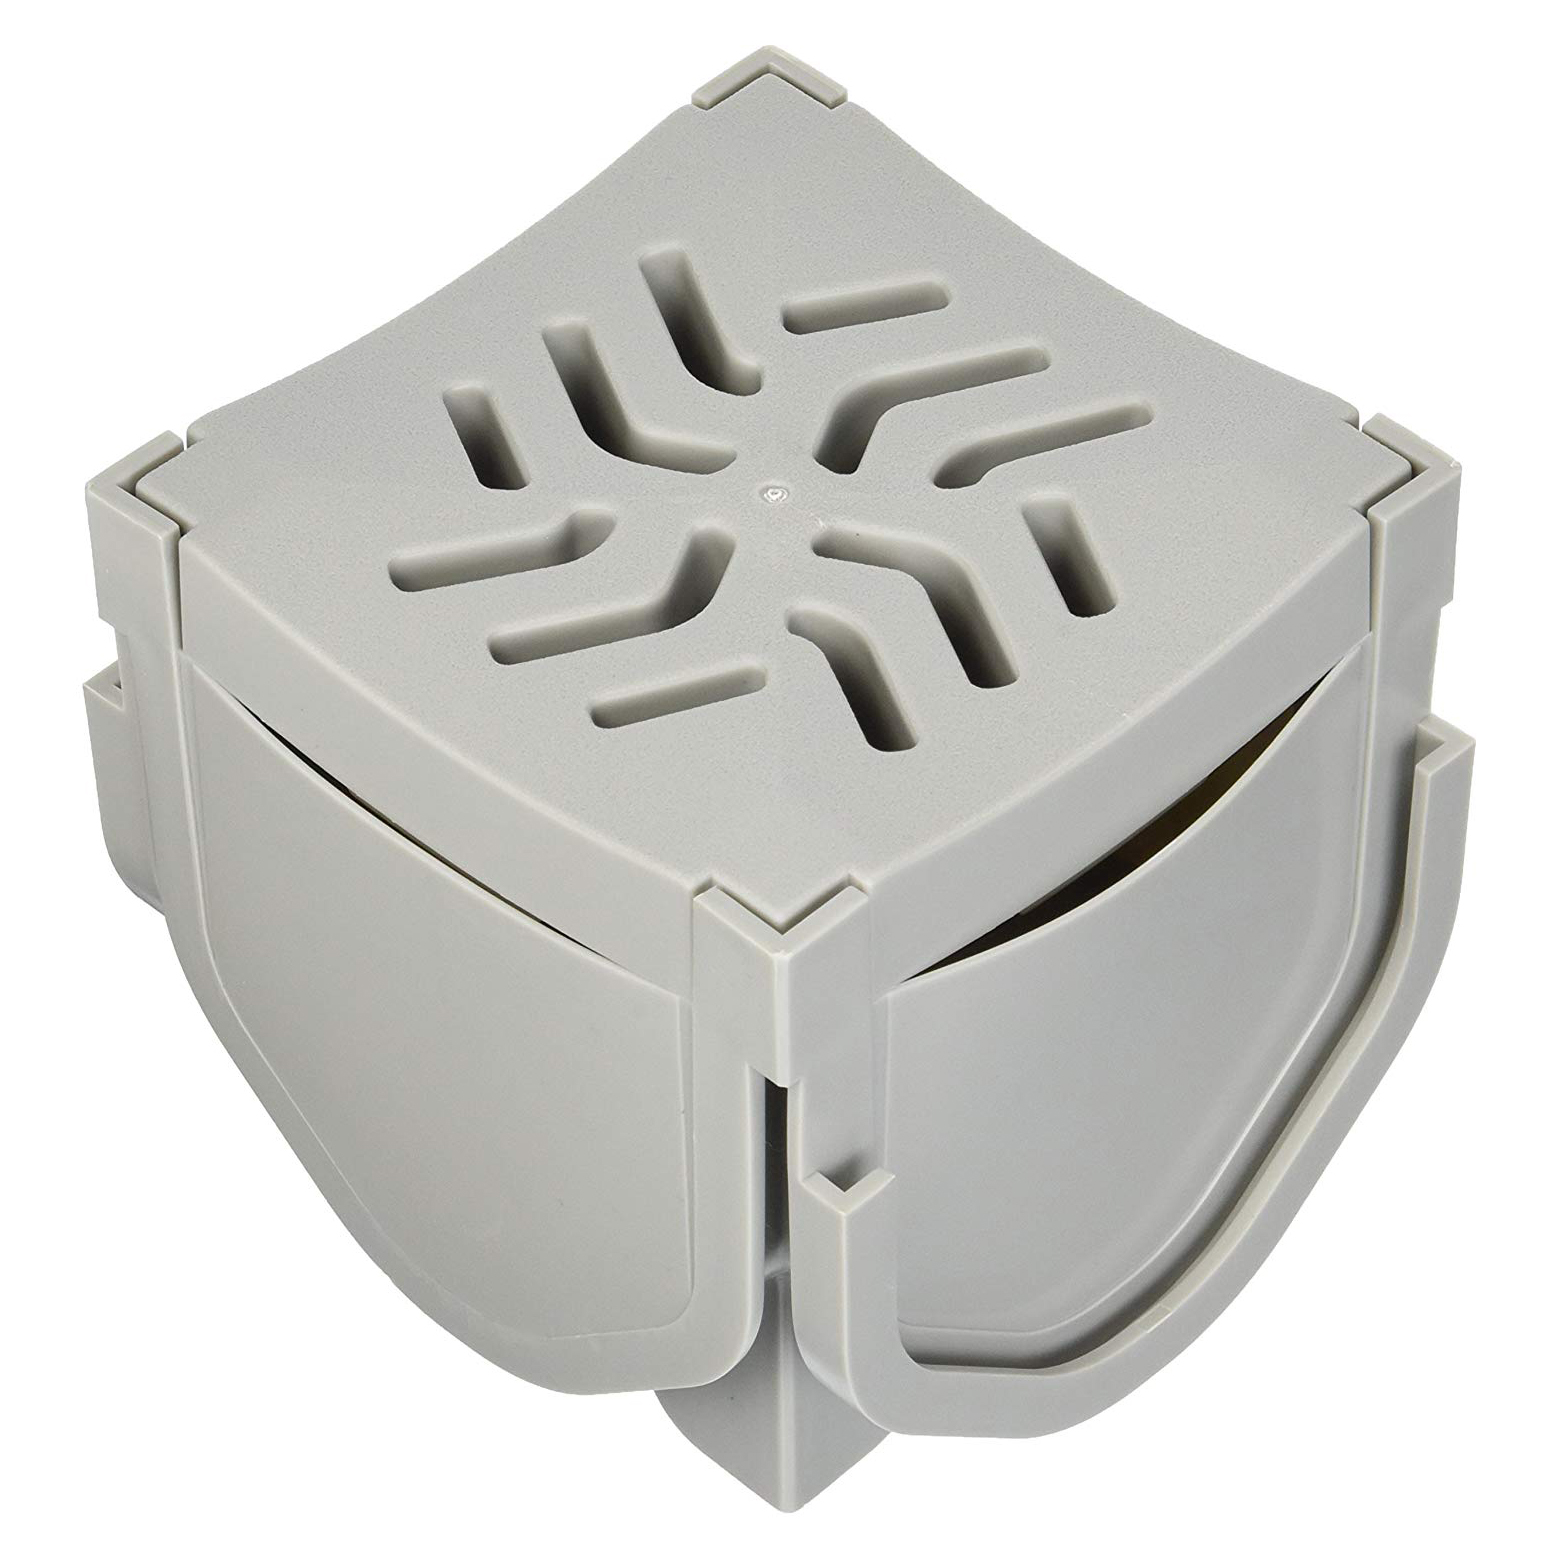 StormDrain Plus Quad - 4-way Connector for Trench Drain